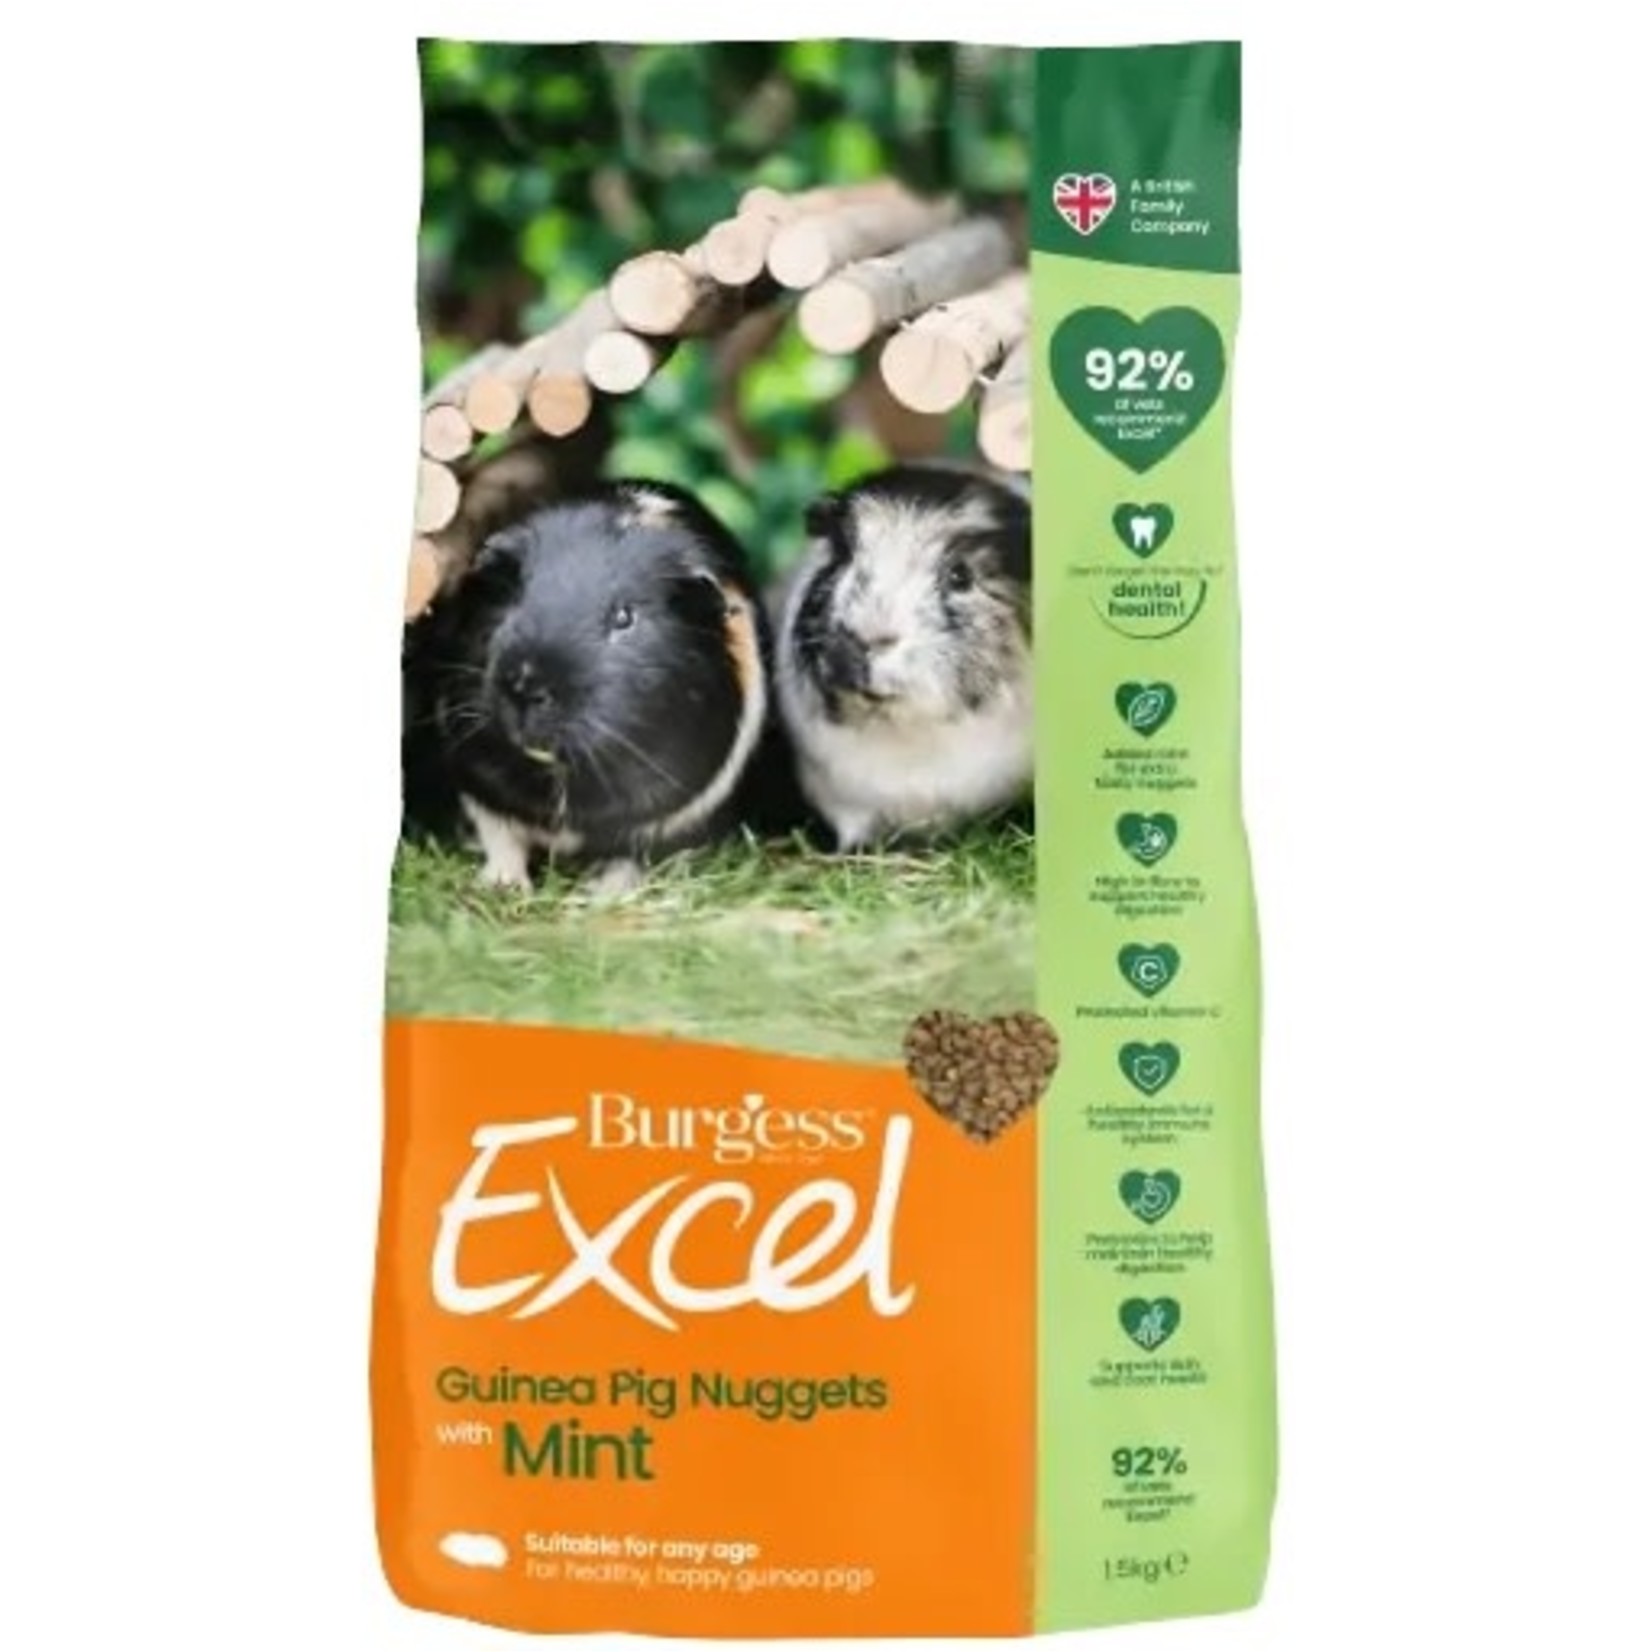 Burgess Excel Guinea Pig Nugget Food with Mint